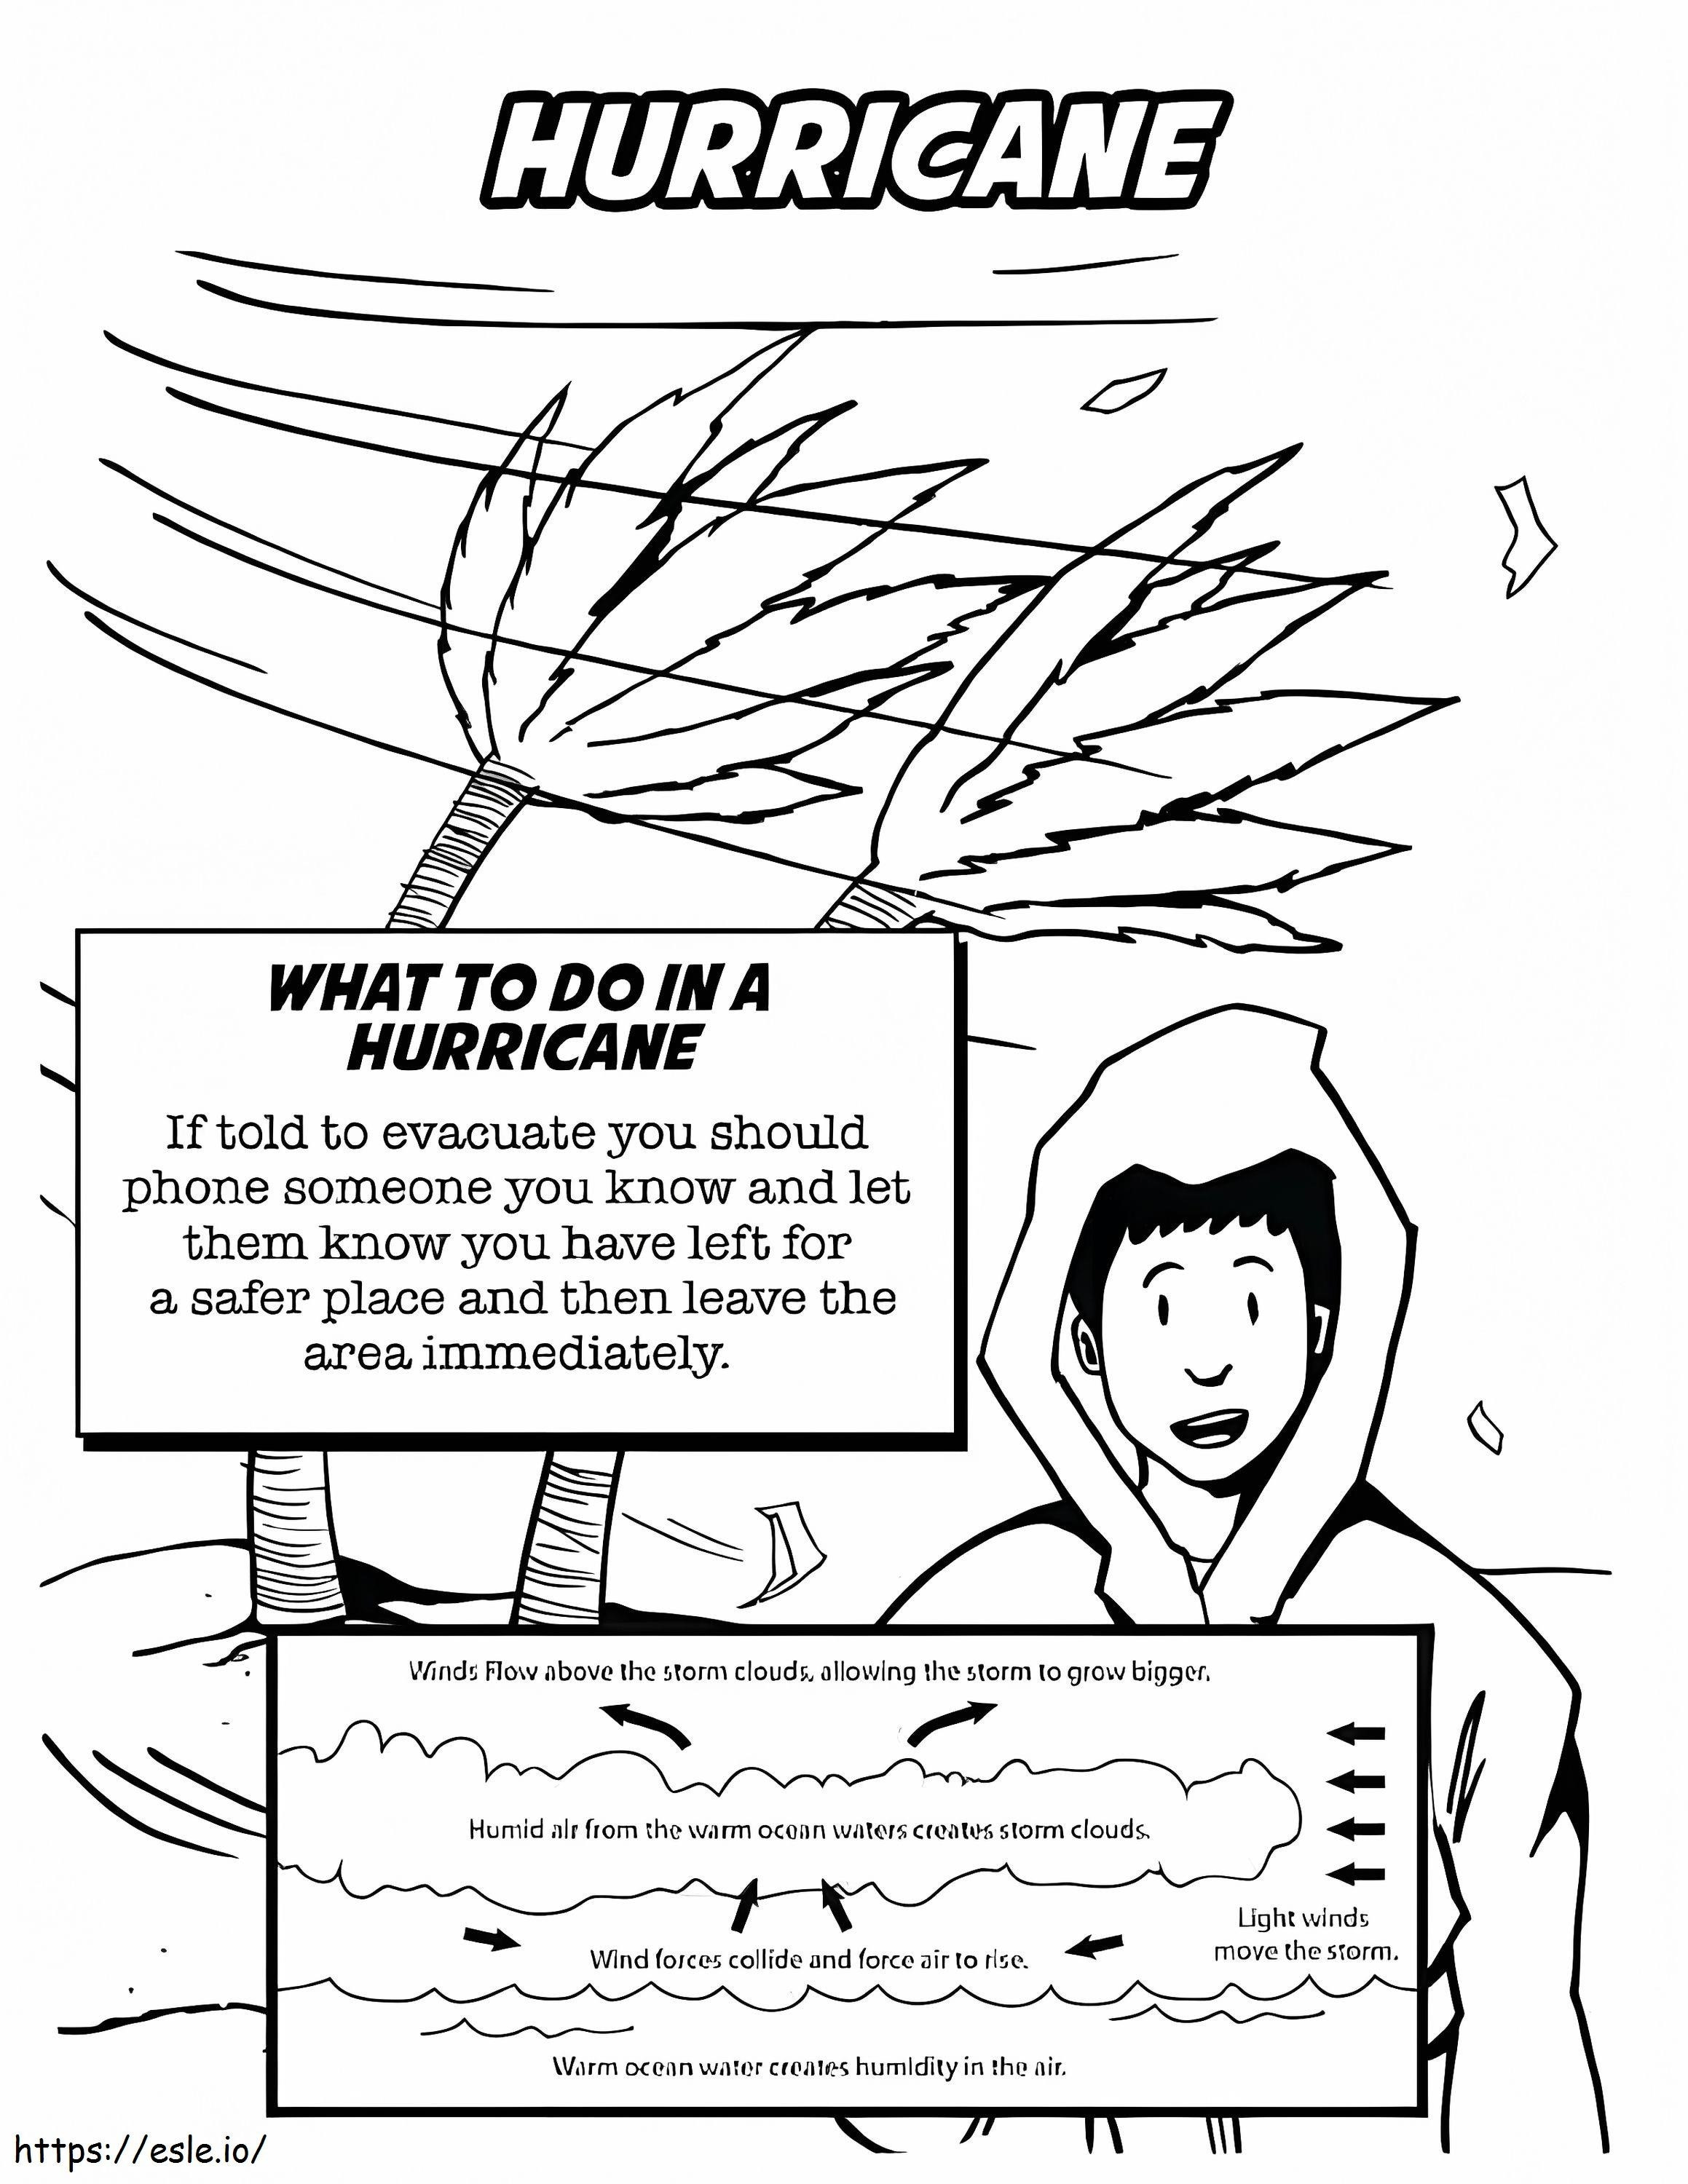 Huricane coloring page